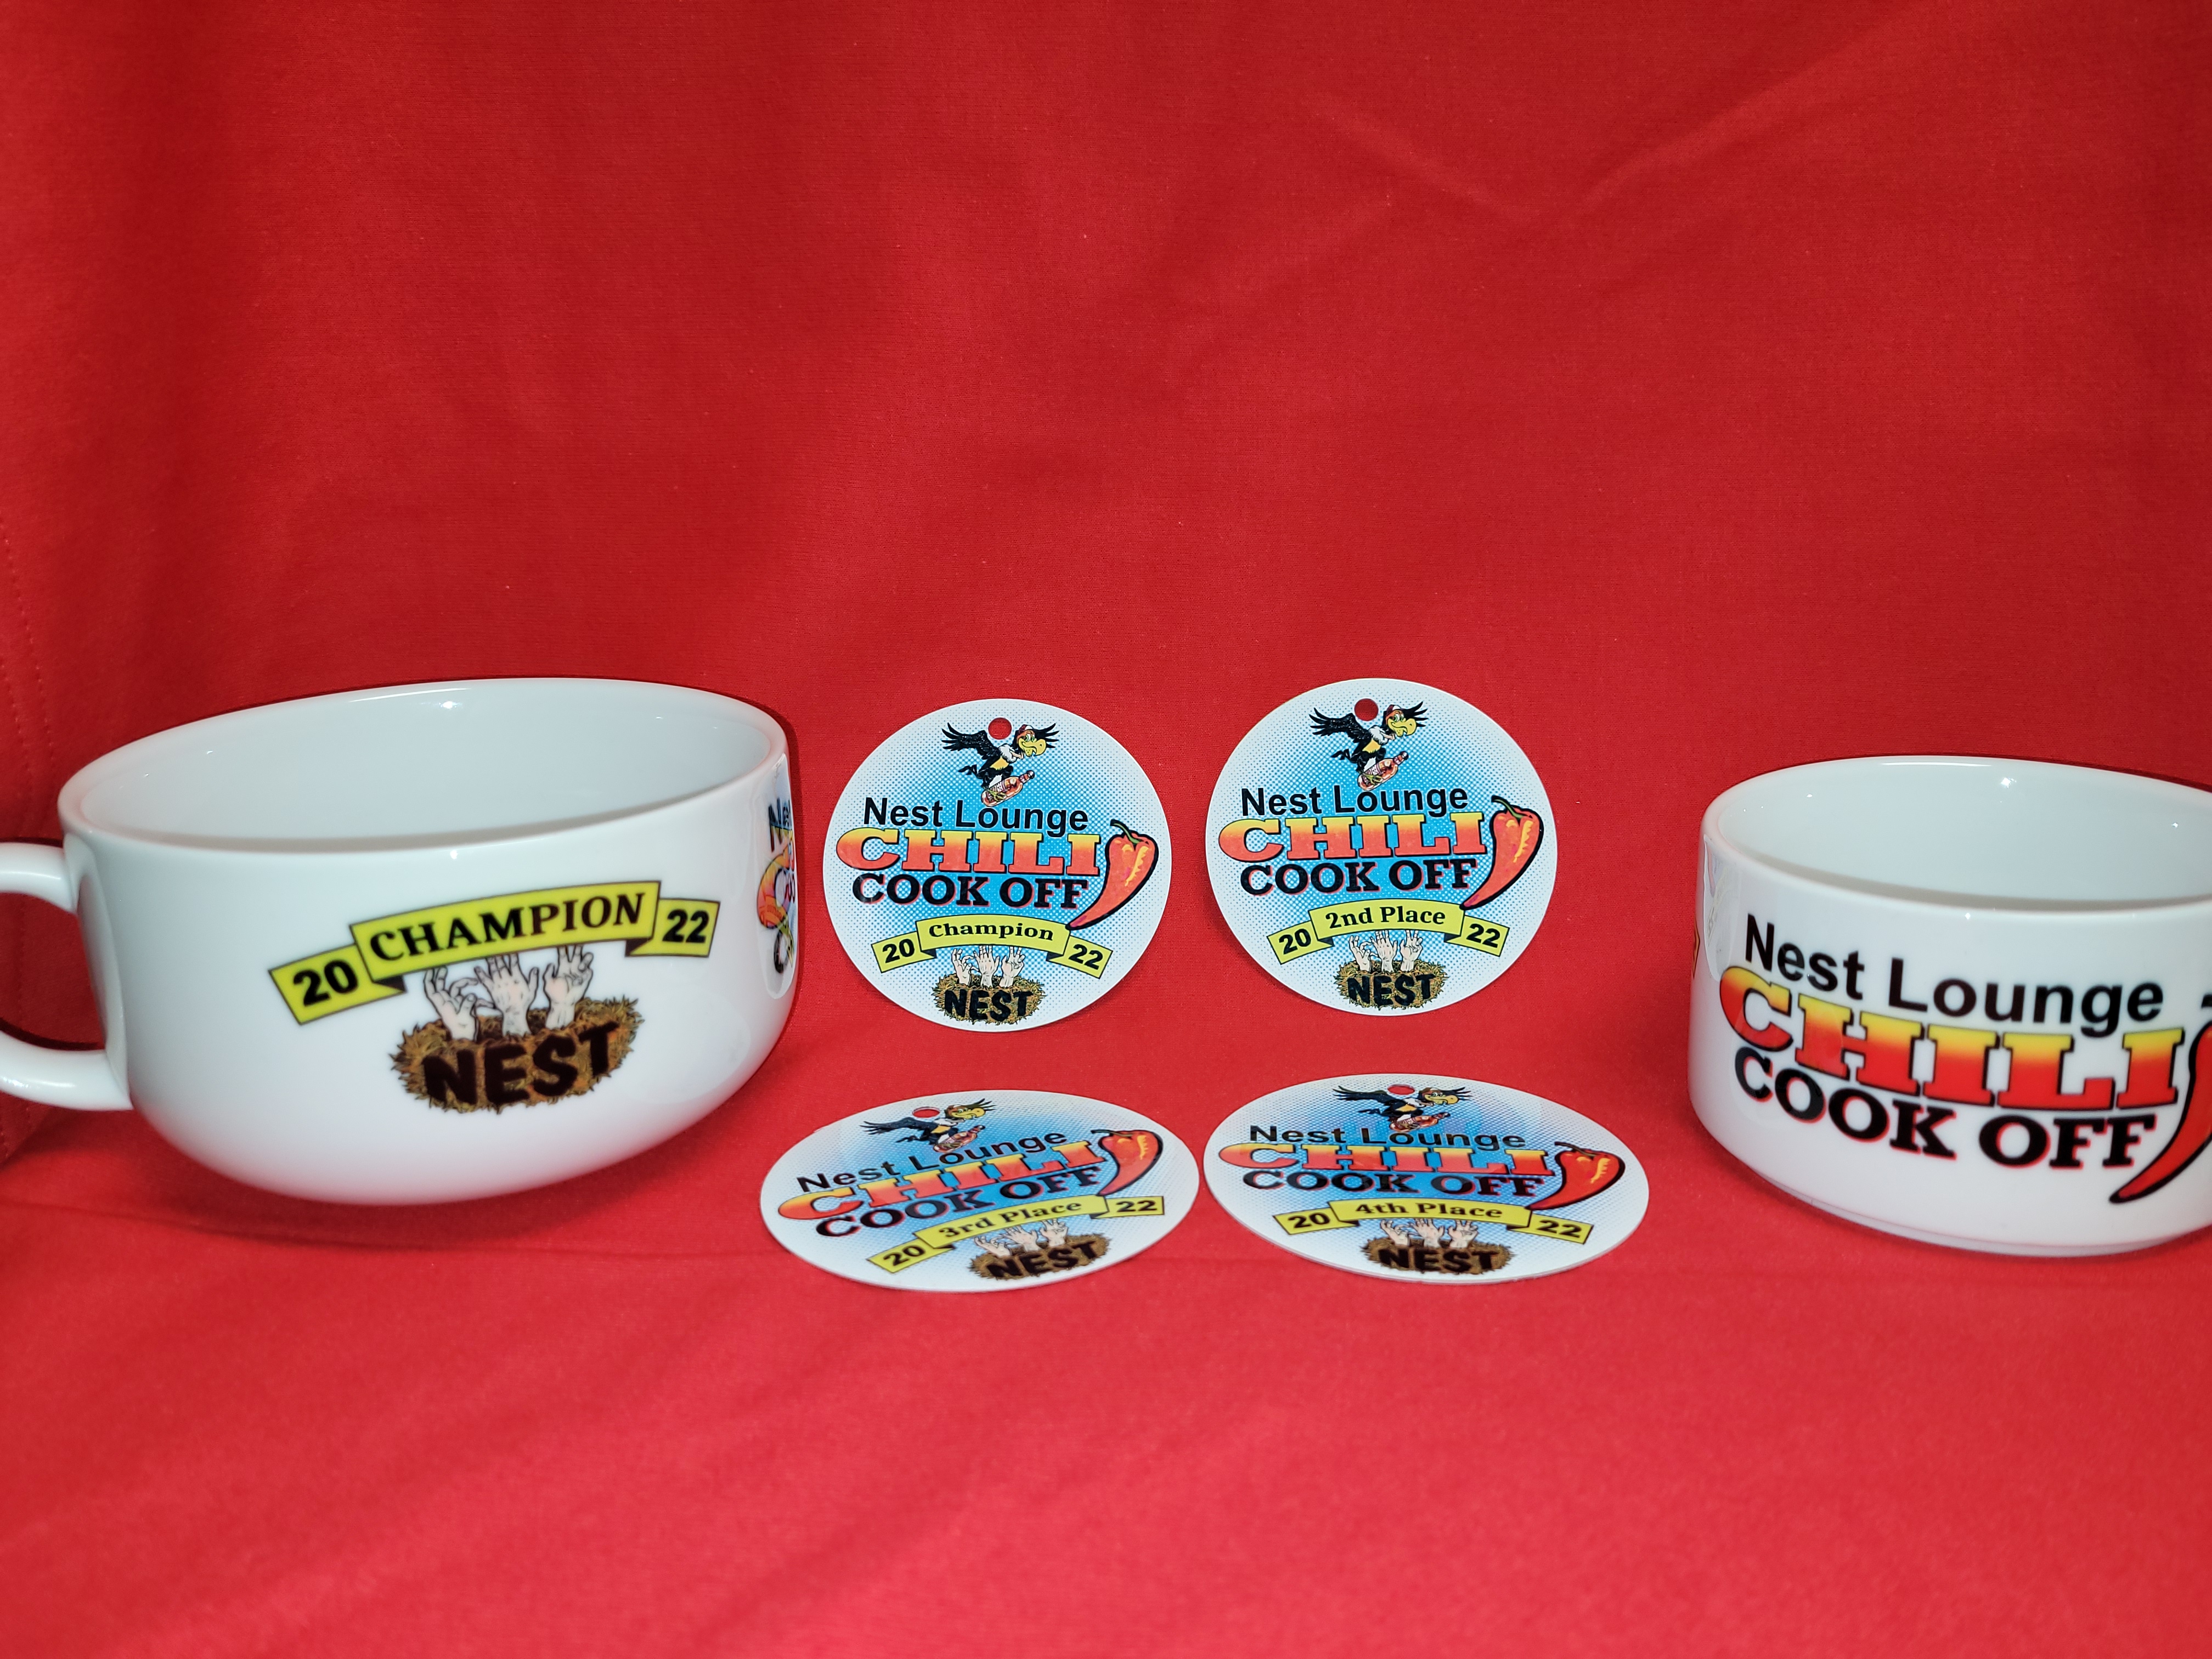 Chili Contest package made with sublimation printing